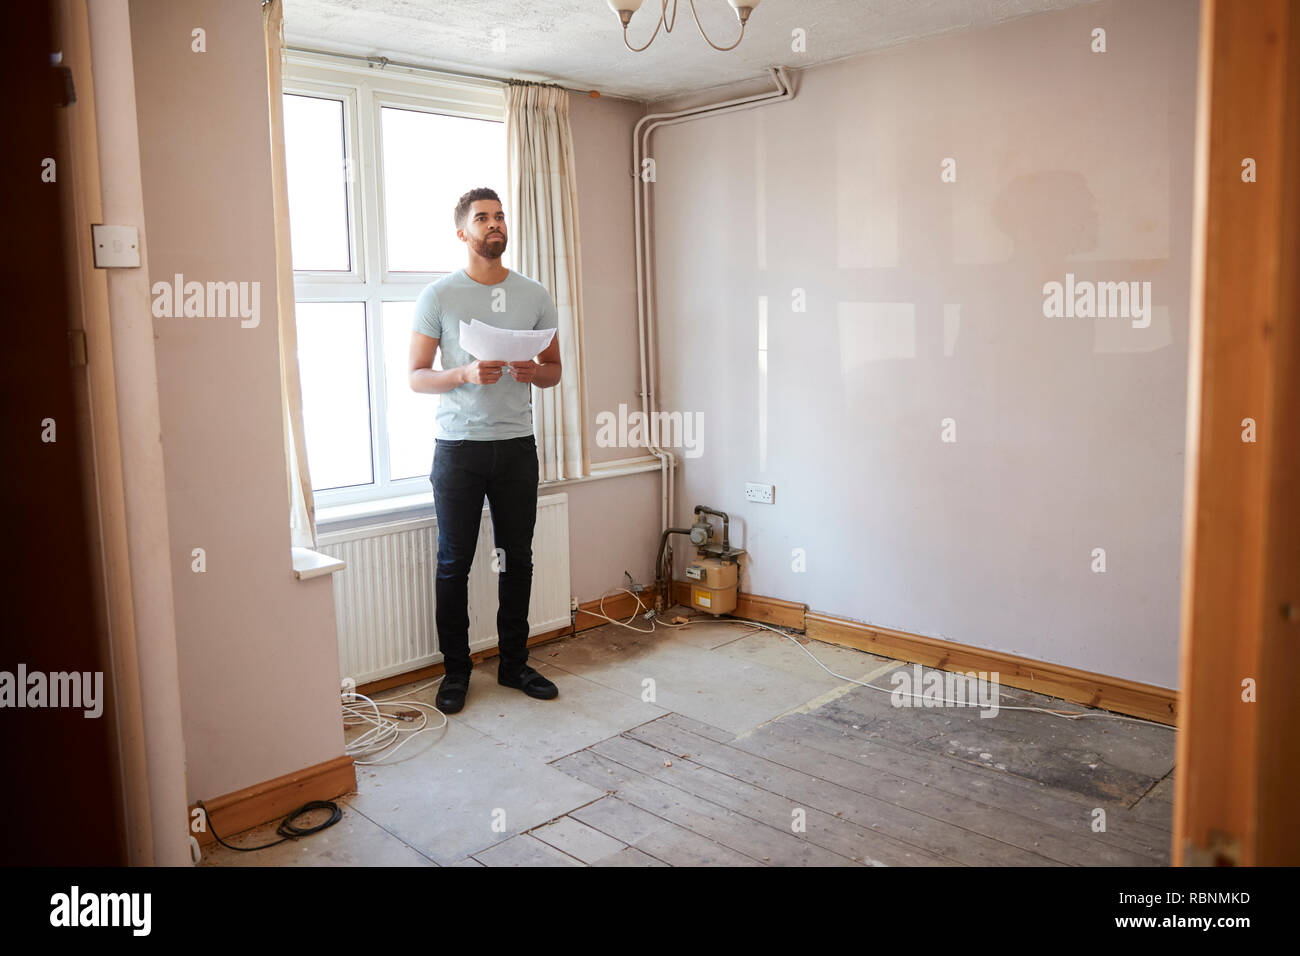 Male First Time Buyer Looking At House Survey In Room To Be Renovated Stock Photo